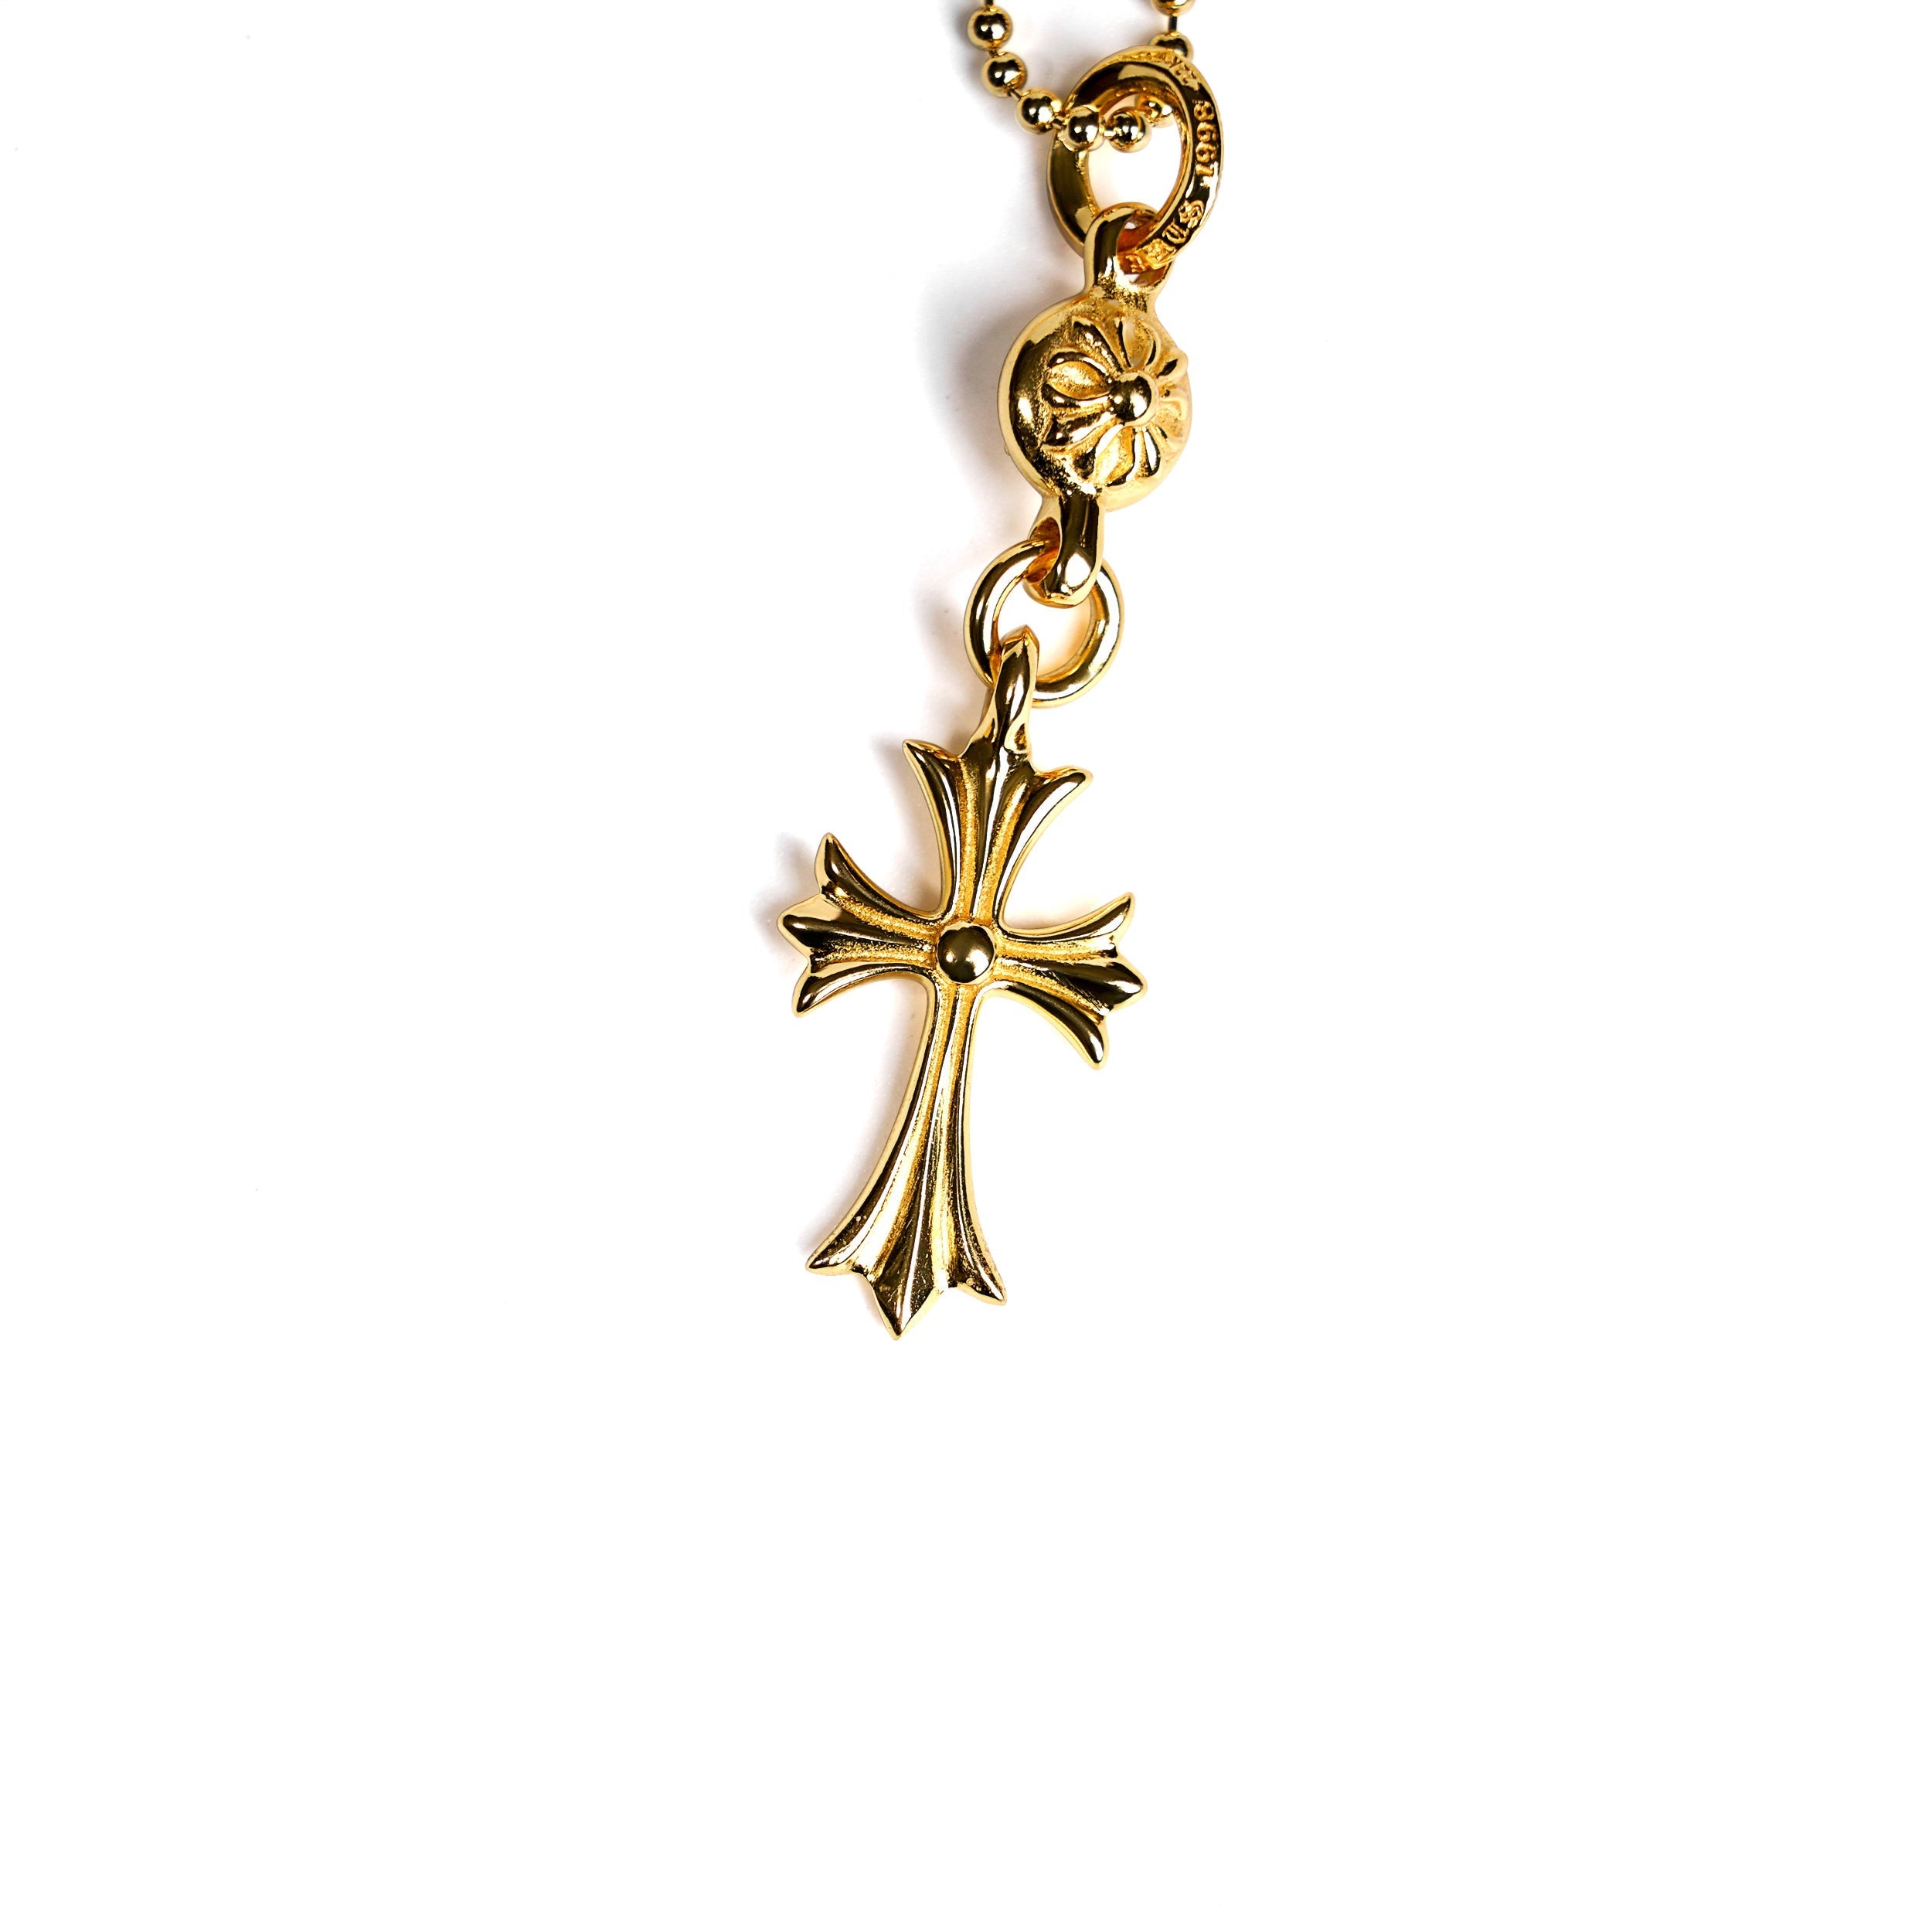 22K GOLD CROSS WITH ONE GOLD BALL CHARM